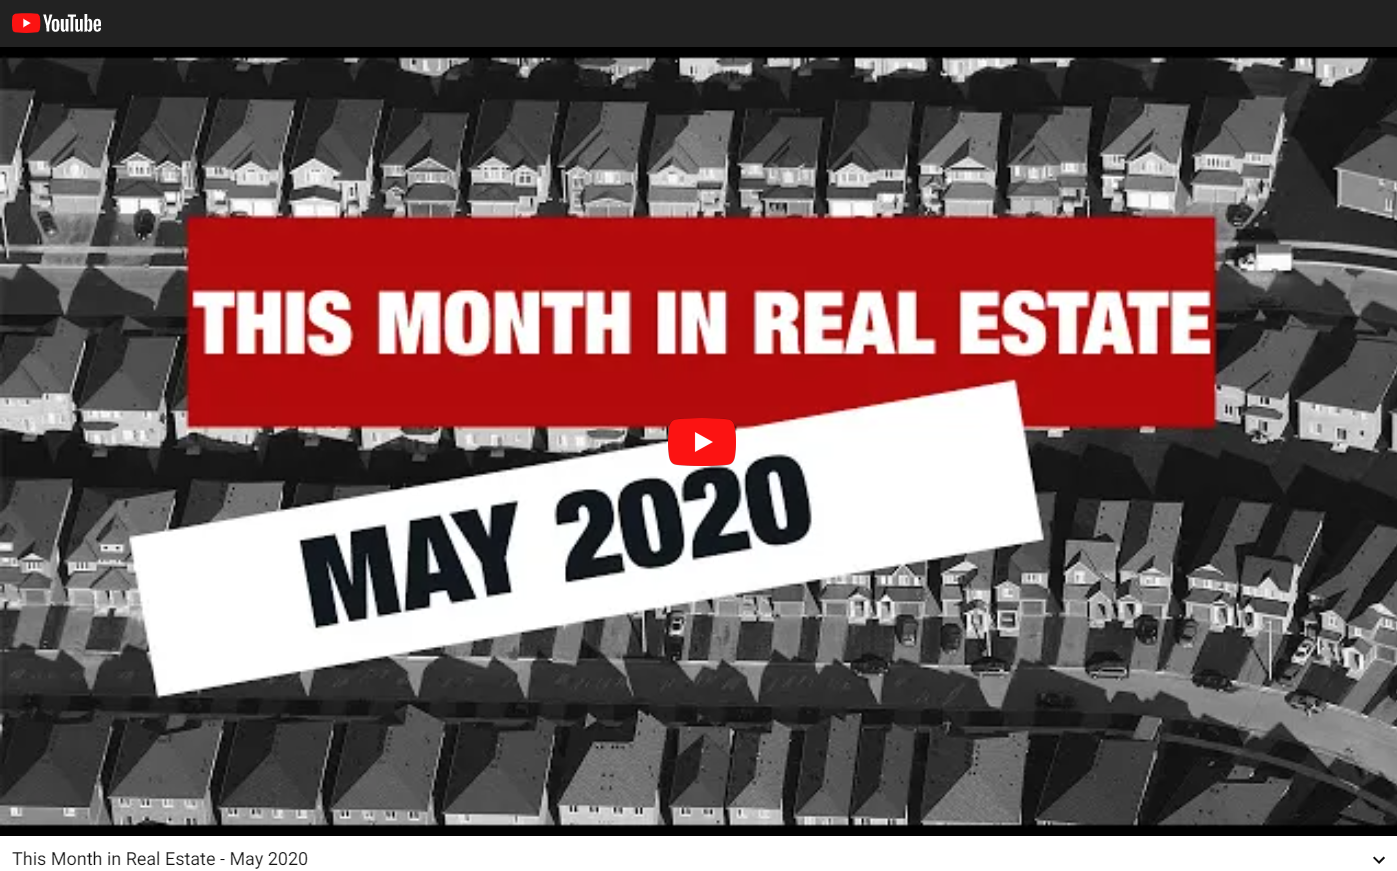 Keller Williams Realty This month in real estate May 2020 for Jean-Luc Andriot blog 051120